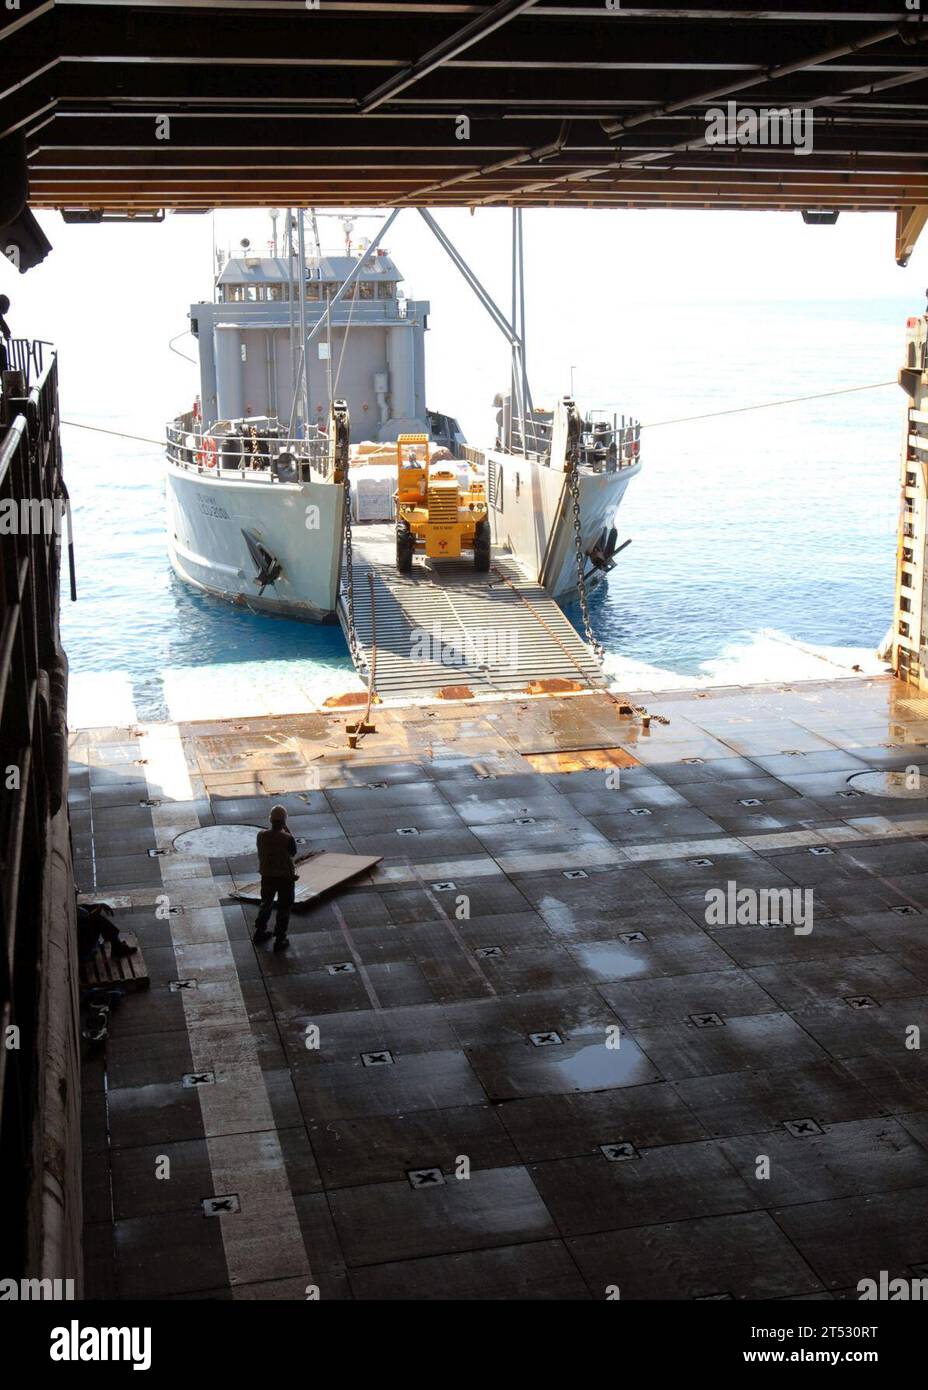 1002094971L-097 CARIBBEAN SEA, Haiti (Feb. 9, 2010) Army Landing Craft Utility (LCU) 2000 conducts a stern-gate marriage with the amphibious dock landing ship USS Fort McHenry (LSD 43) to take on pallets of relief supplies. Fort McHenry is conducting humanitarian and disaster relief operations as part of Operation Unified Response after a 7.0 magnitude earthquake caused severe damage in and around Port-au-Prince, Haiti Jan. 12. Stock Photo